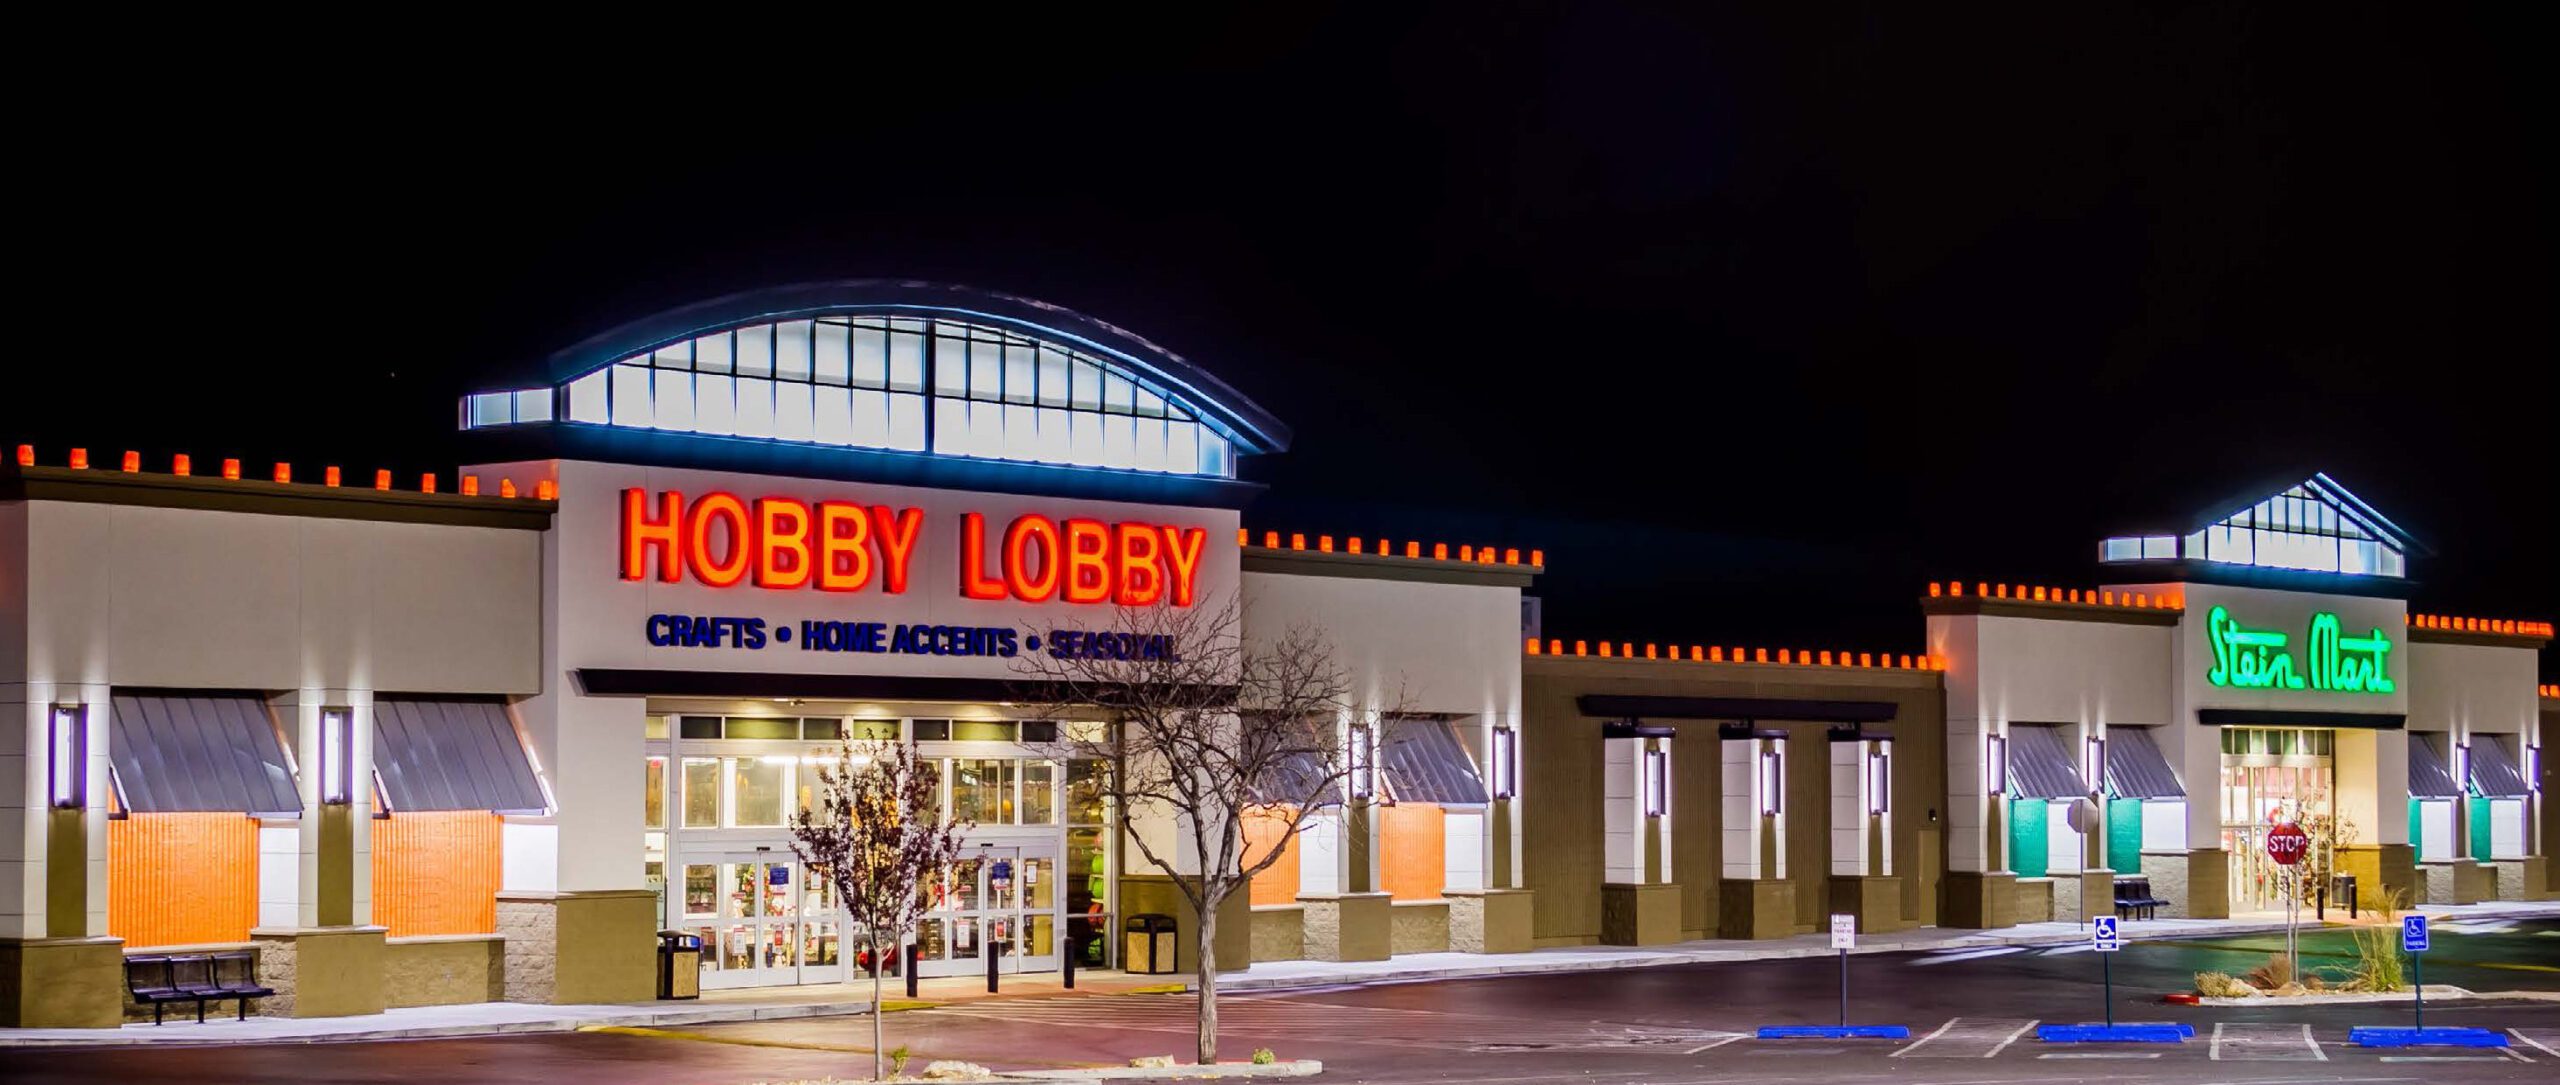 Featured image for “Sierra Vista Shopping Center”